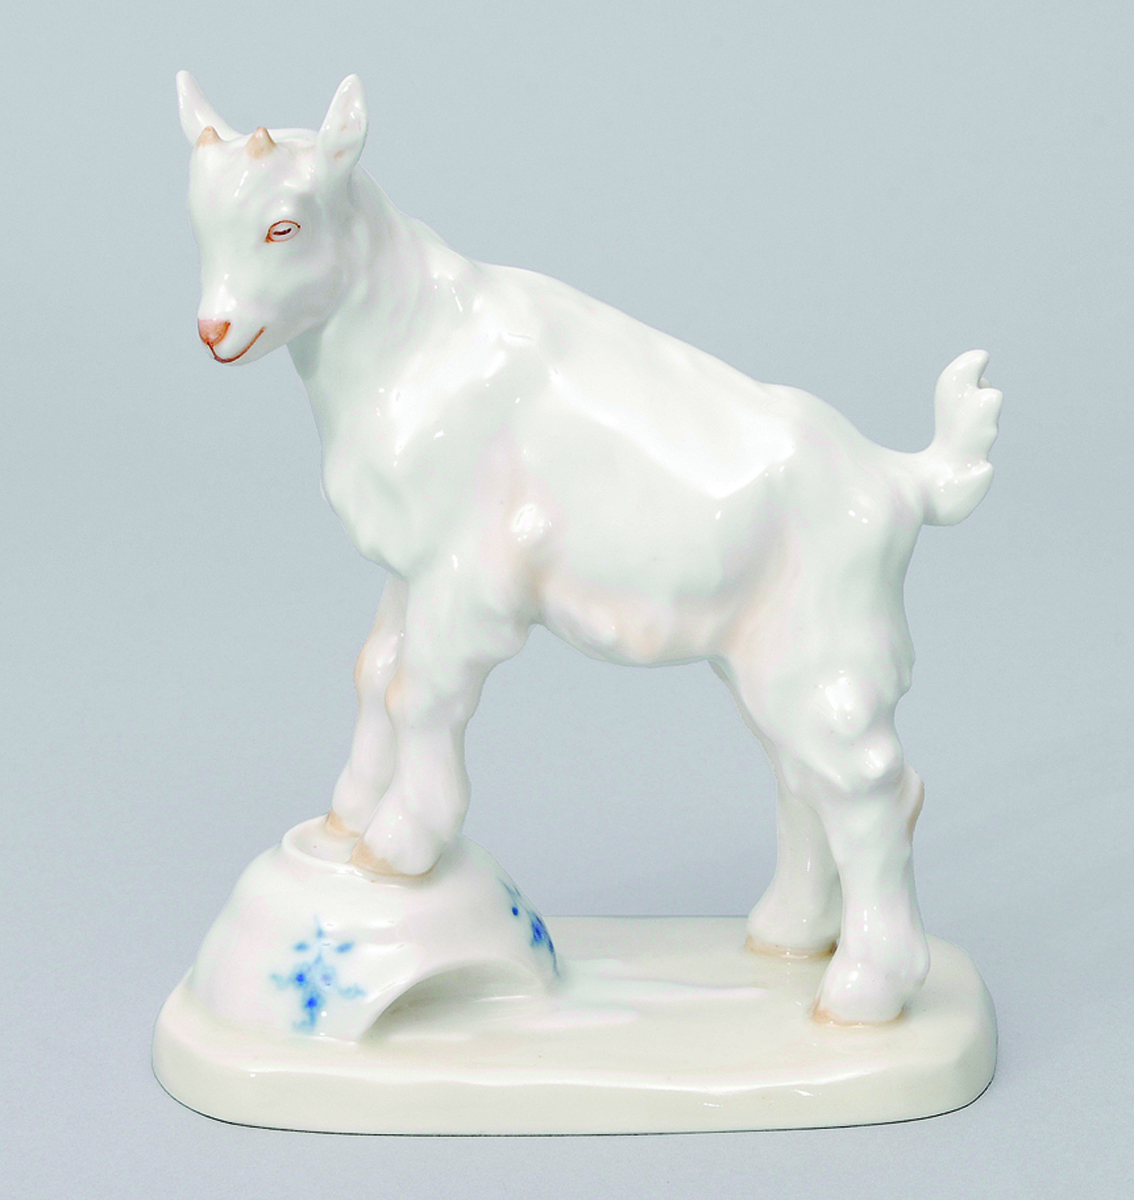 An animal figure of a goat